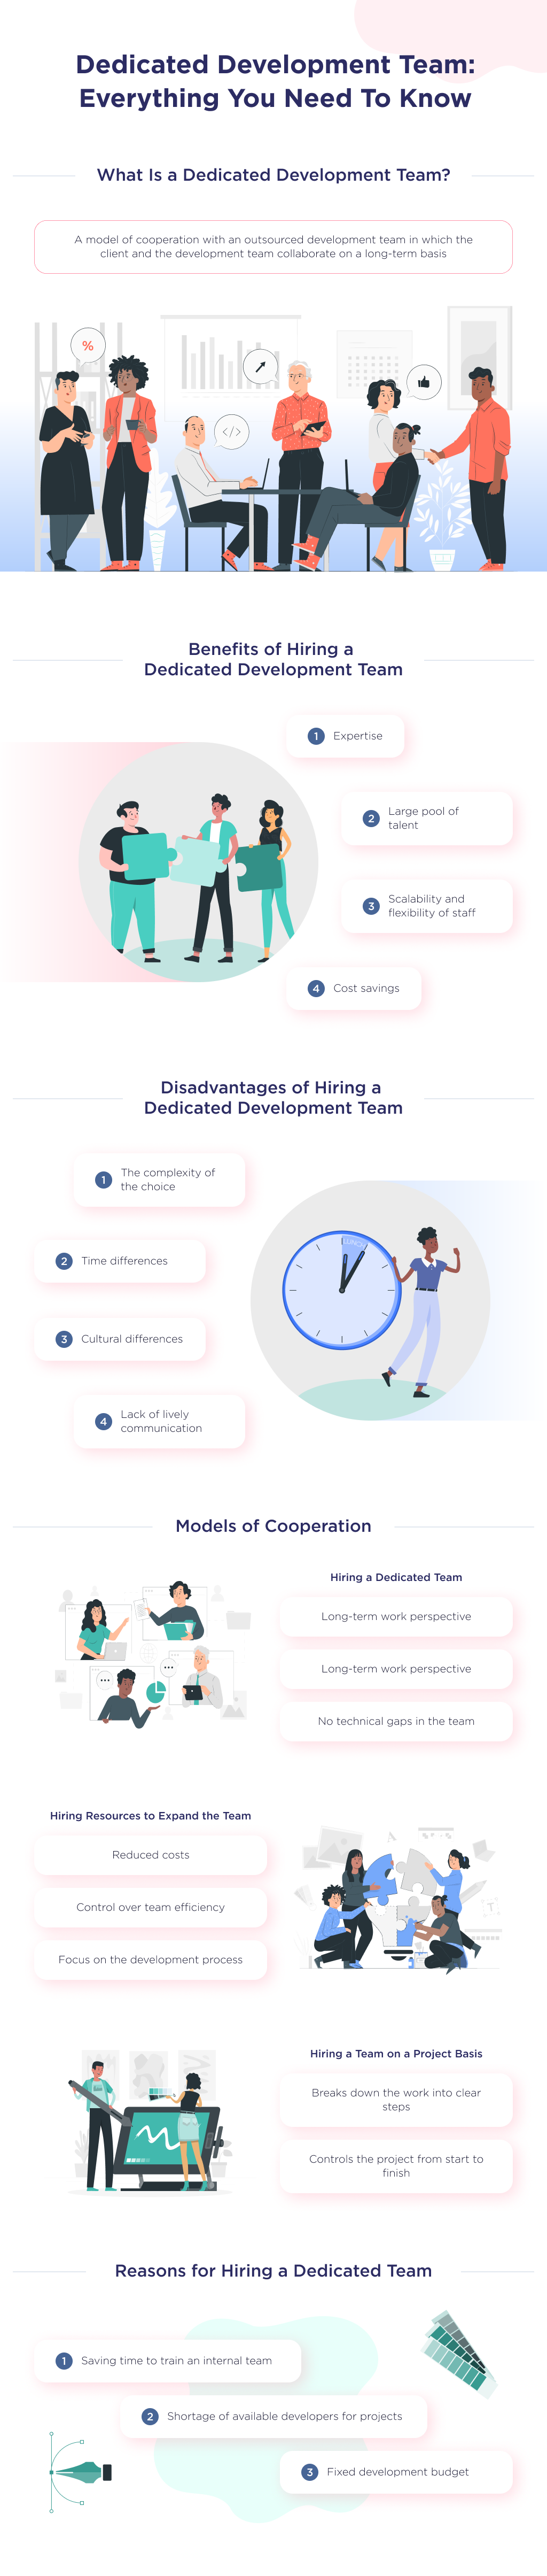 This infographic shows a detailed explanation of dedicated development team for hire is, what the major advantages and disadvantages are, and when to consider hiring a dedicated development team